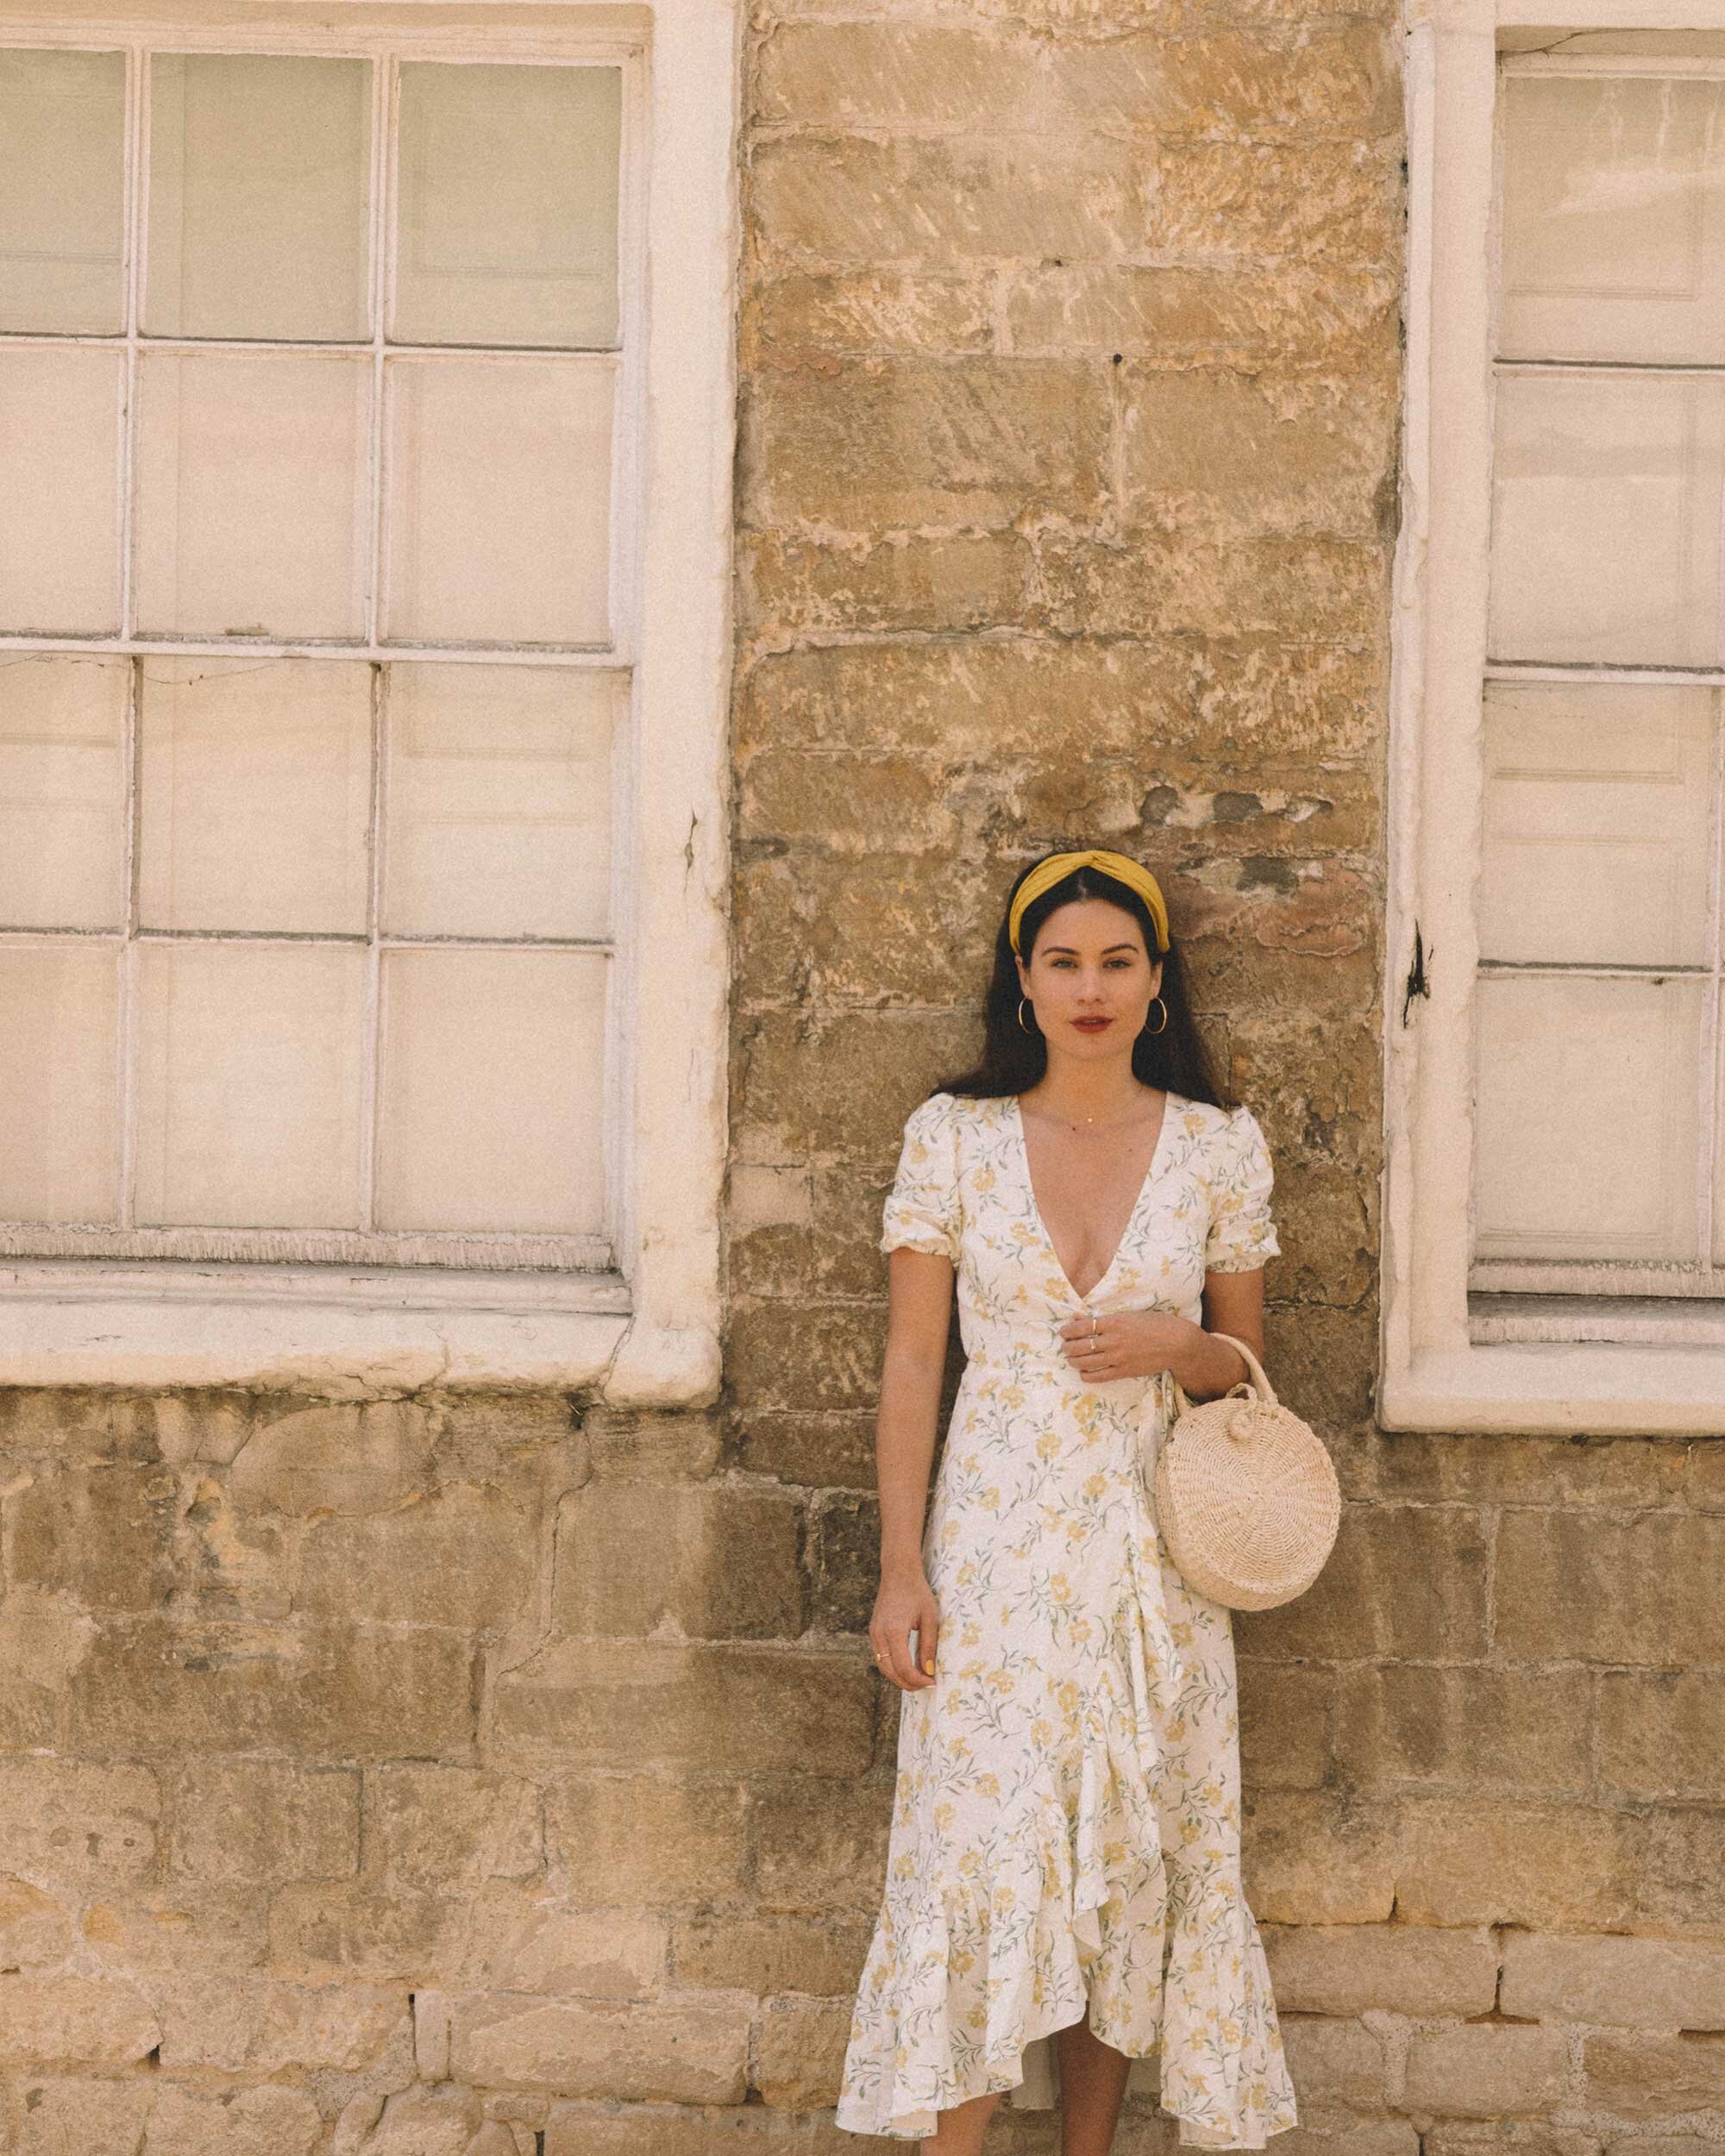 Sarah+Butler+of+Sarah+Styles+Seattle+wears+And+Other+Stories+Ruffled+Linen+Wrap+Midi+Dress+and+round+woven+bag+in+England+Countryside+for+the+perfect+floral+summer+dress+|+@sarahchristine+7-3.jpg